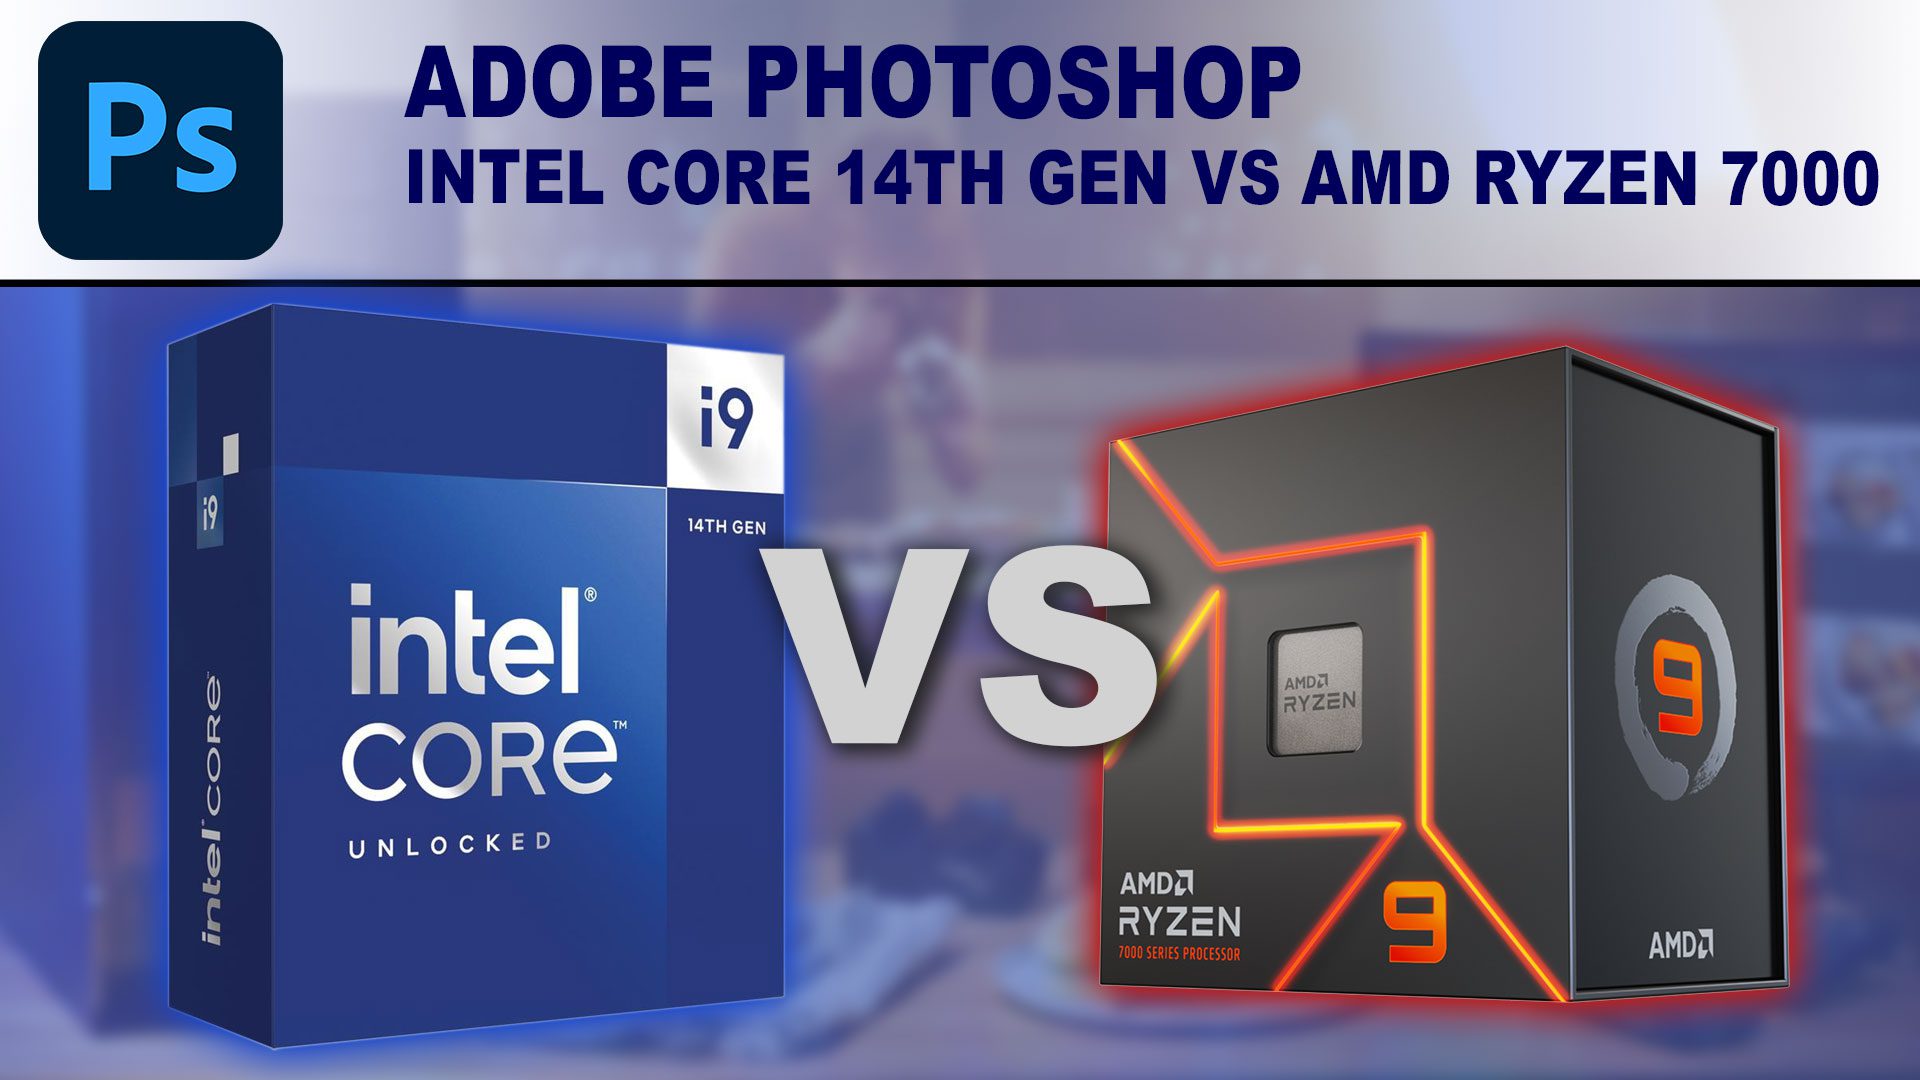 Decorative Image: Intel Core i9-14900K box and AMD Ryzen 9 7950X box on a blue background with the words "VS" between them and the title "Adobe Photoshop" above them.